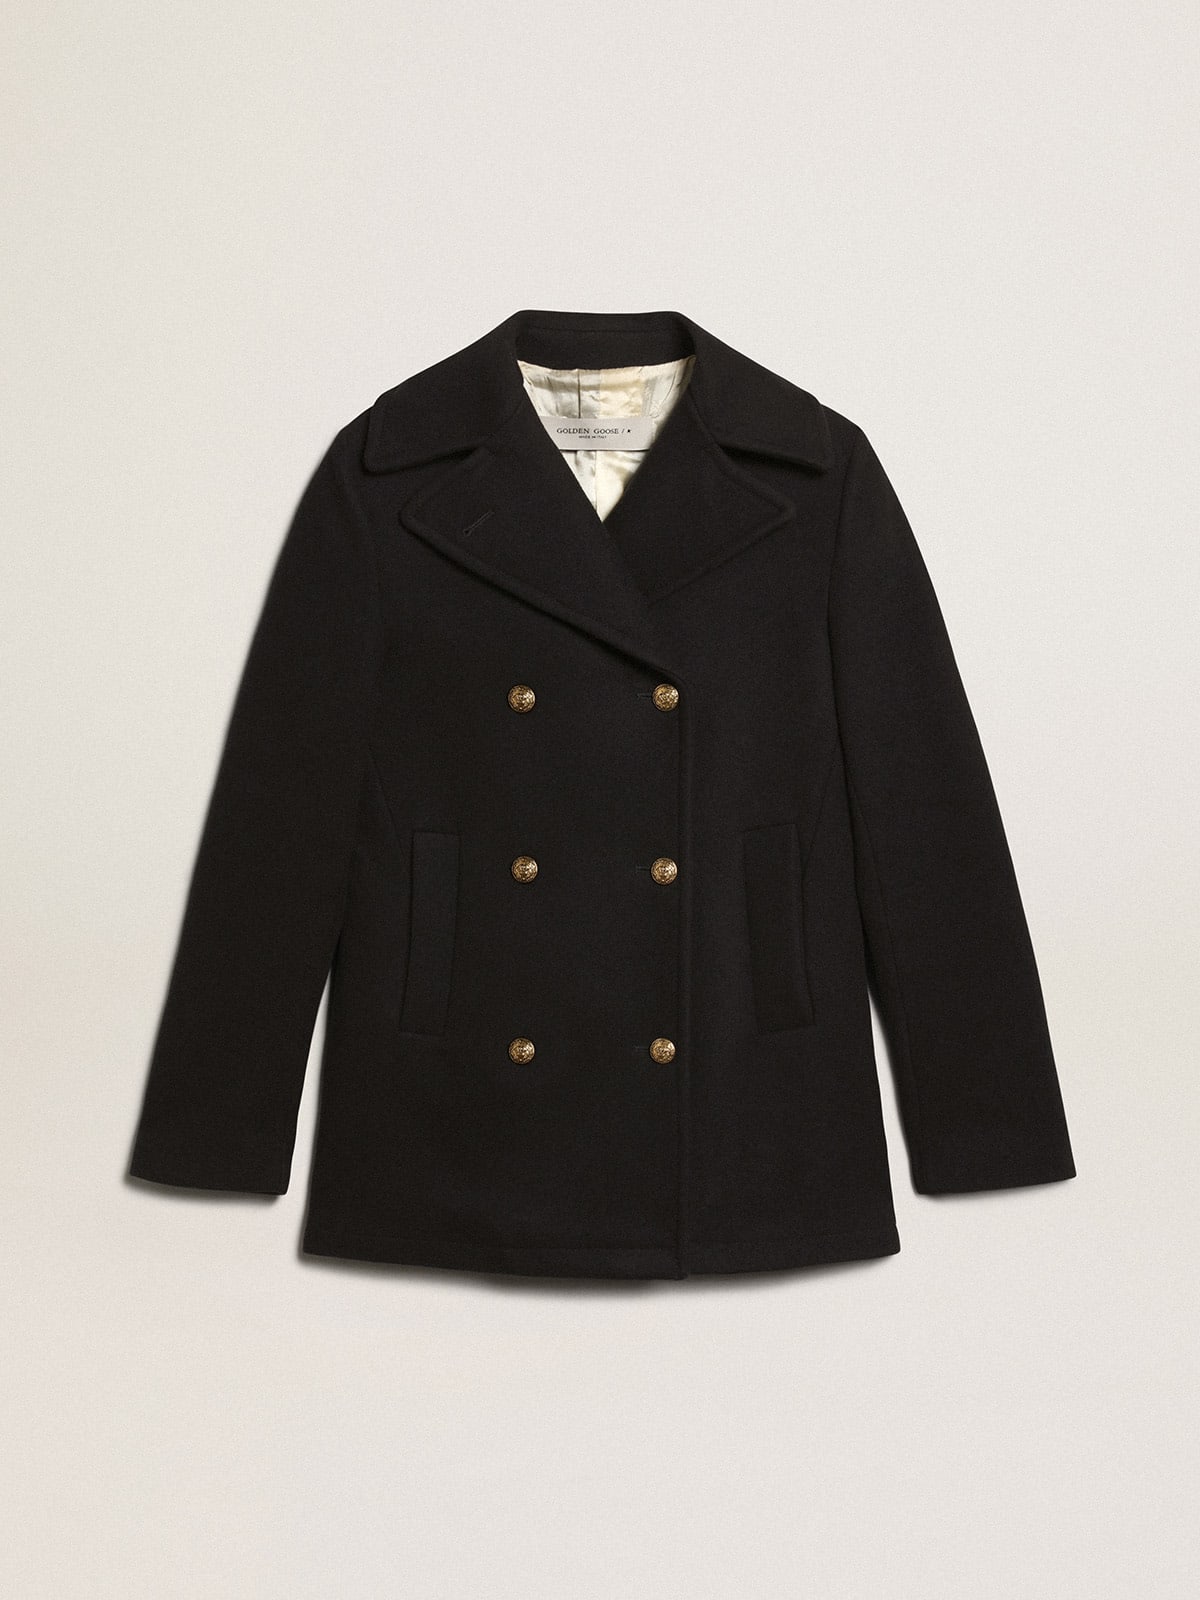 Women's dark blue peacoat with gold-colored heraldic buttons